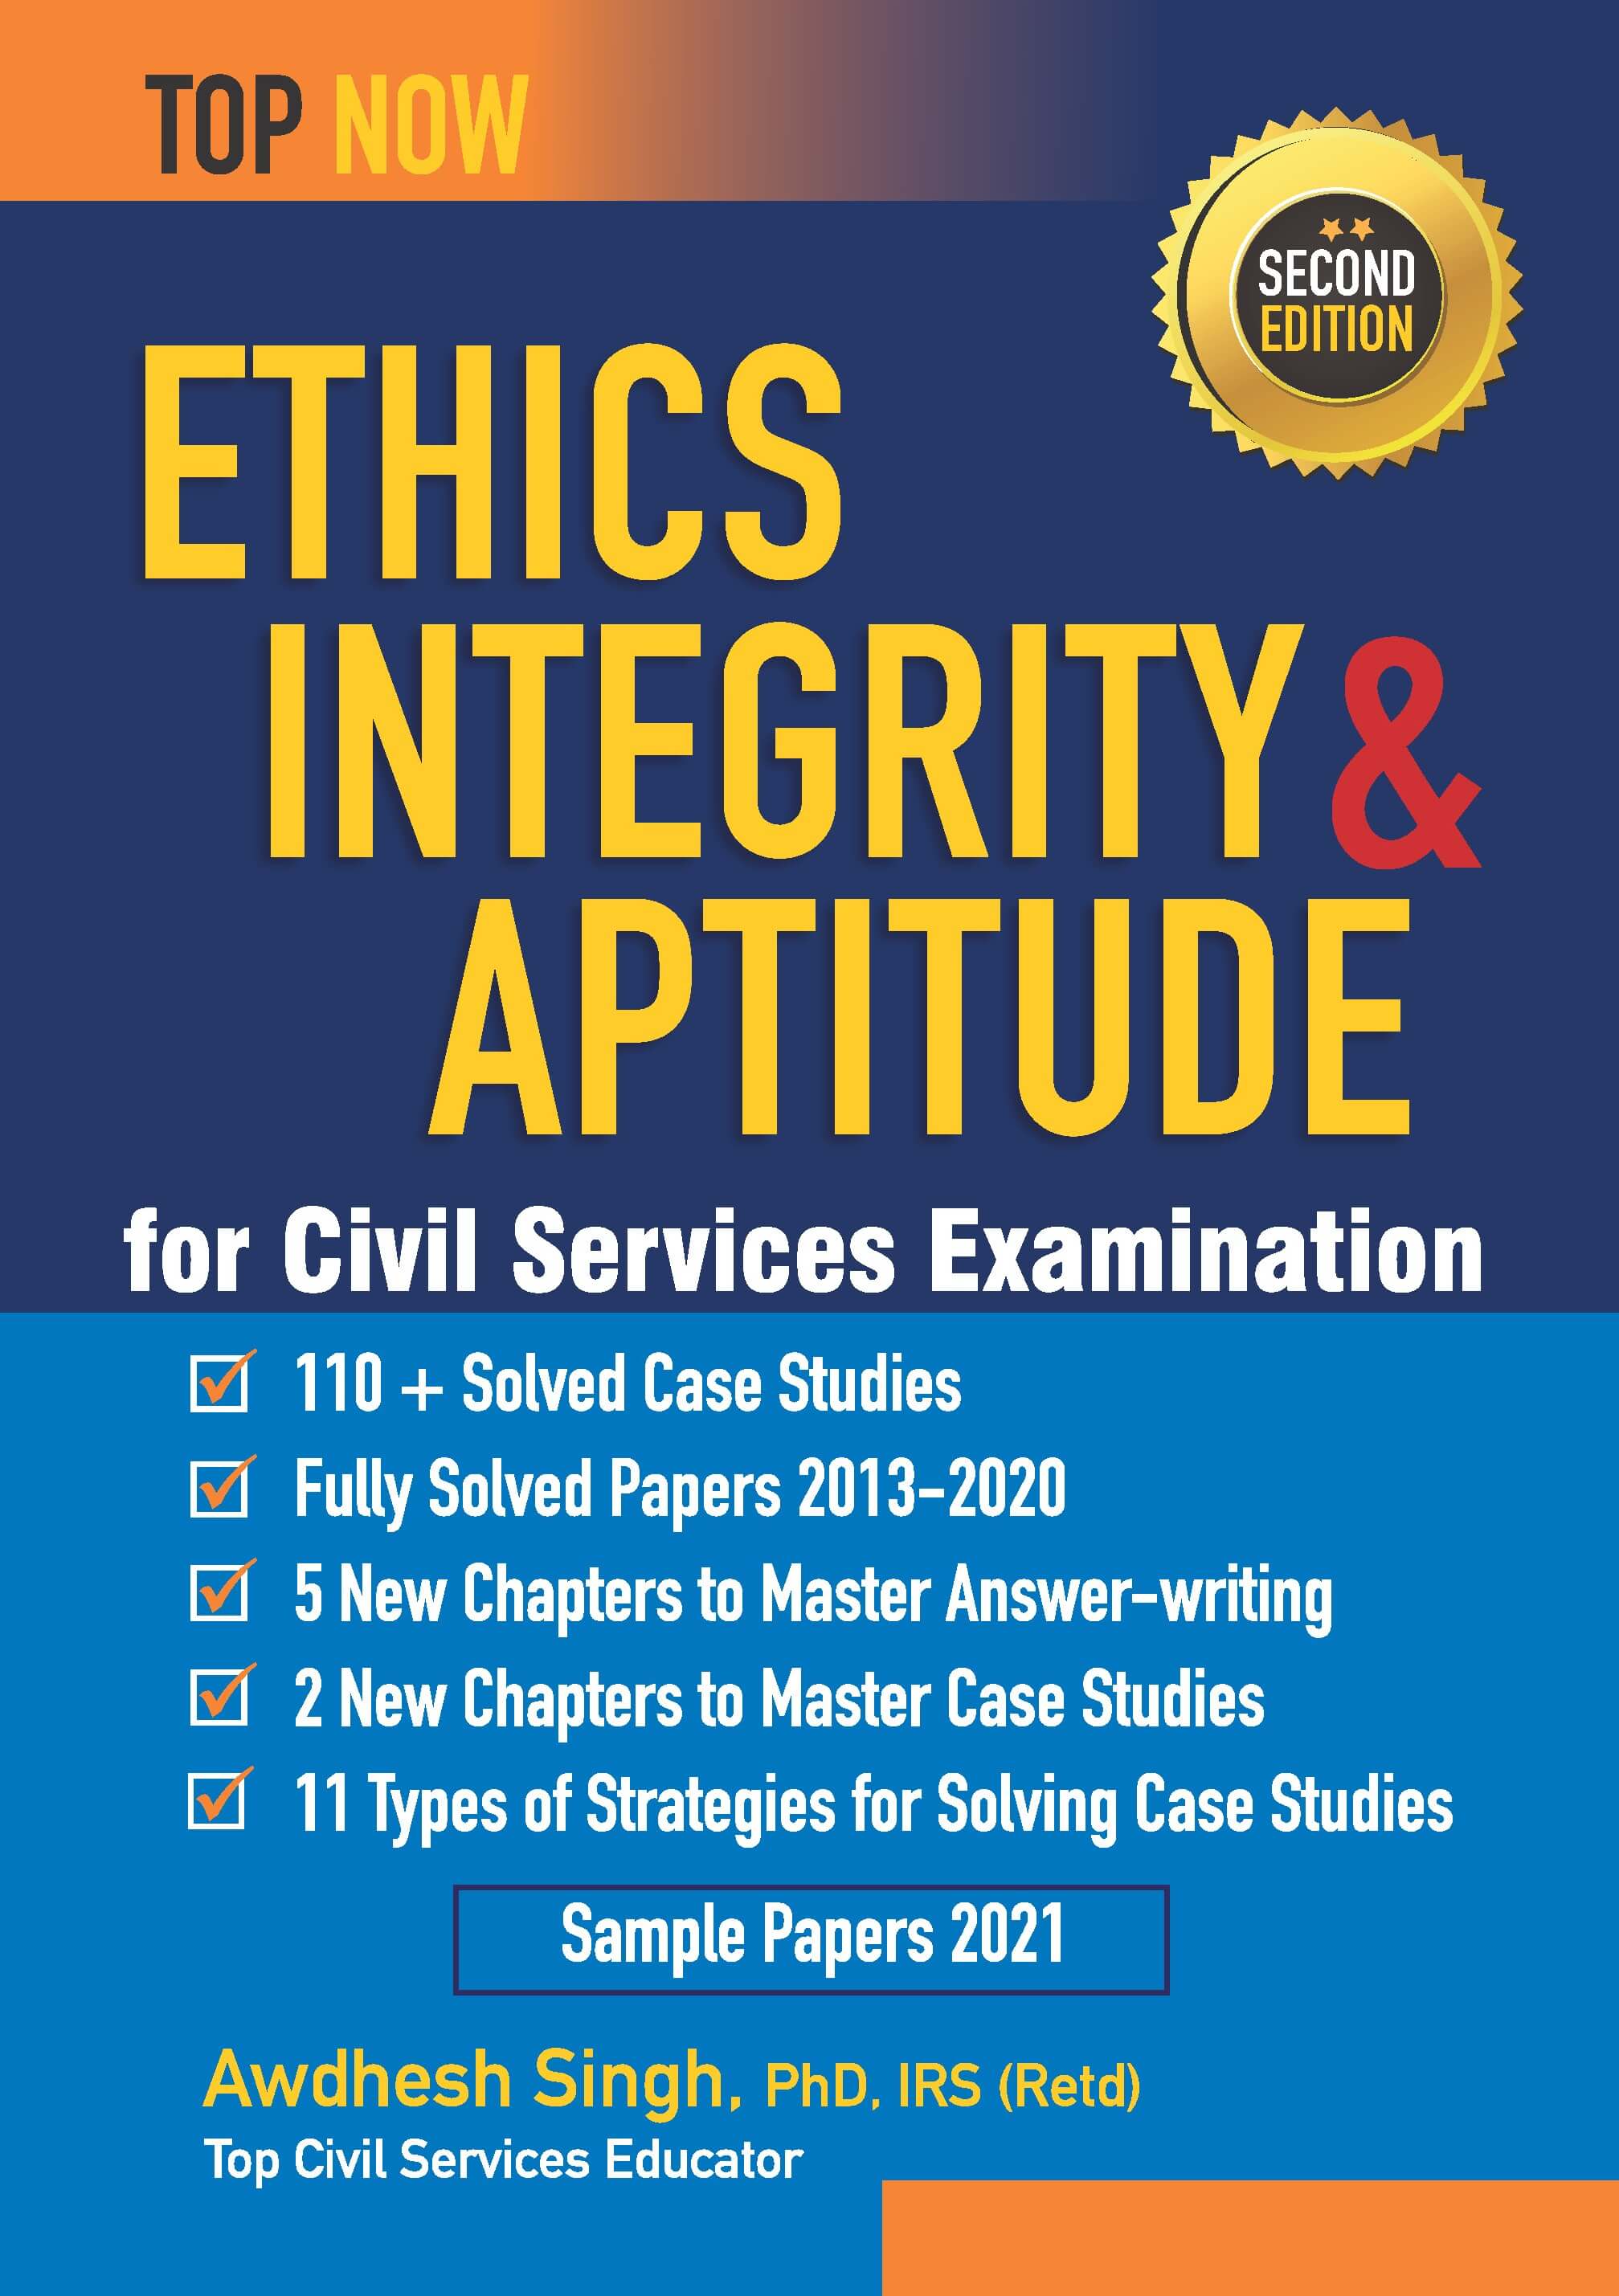 Ethics, Integrity & Aptitude For Civil Services Examination Second Edition: Includes Fully-Solved Papers 2013-20 (Top Now)